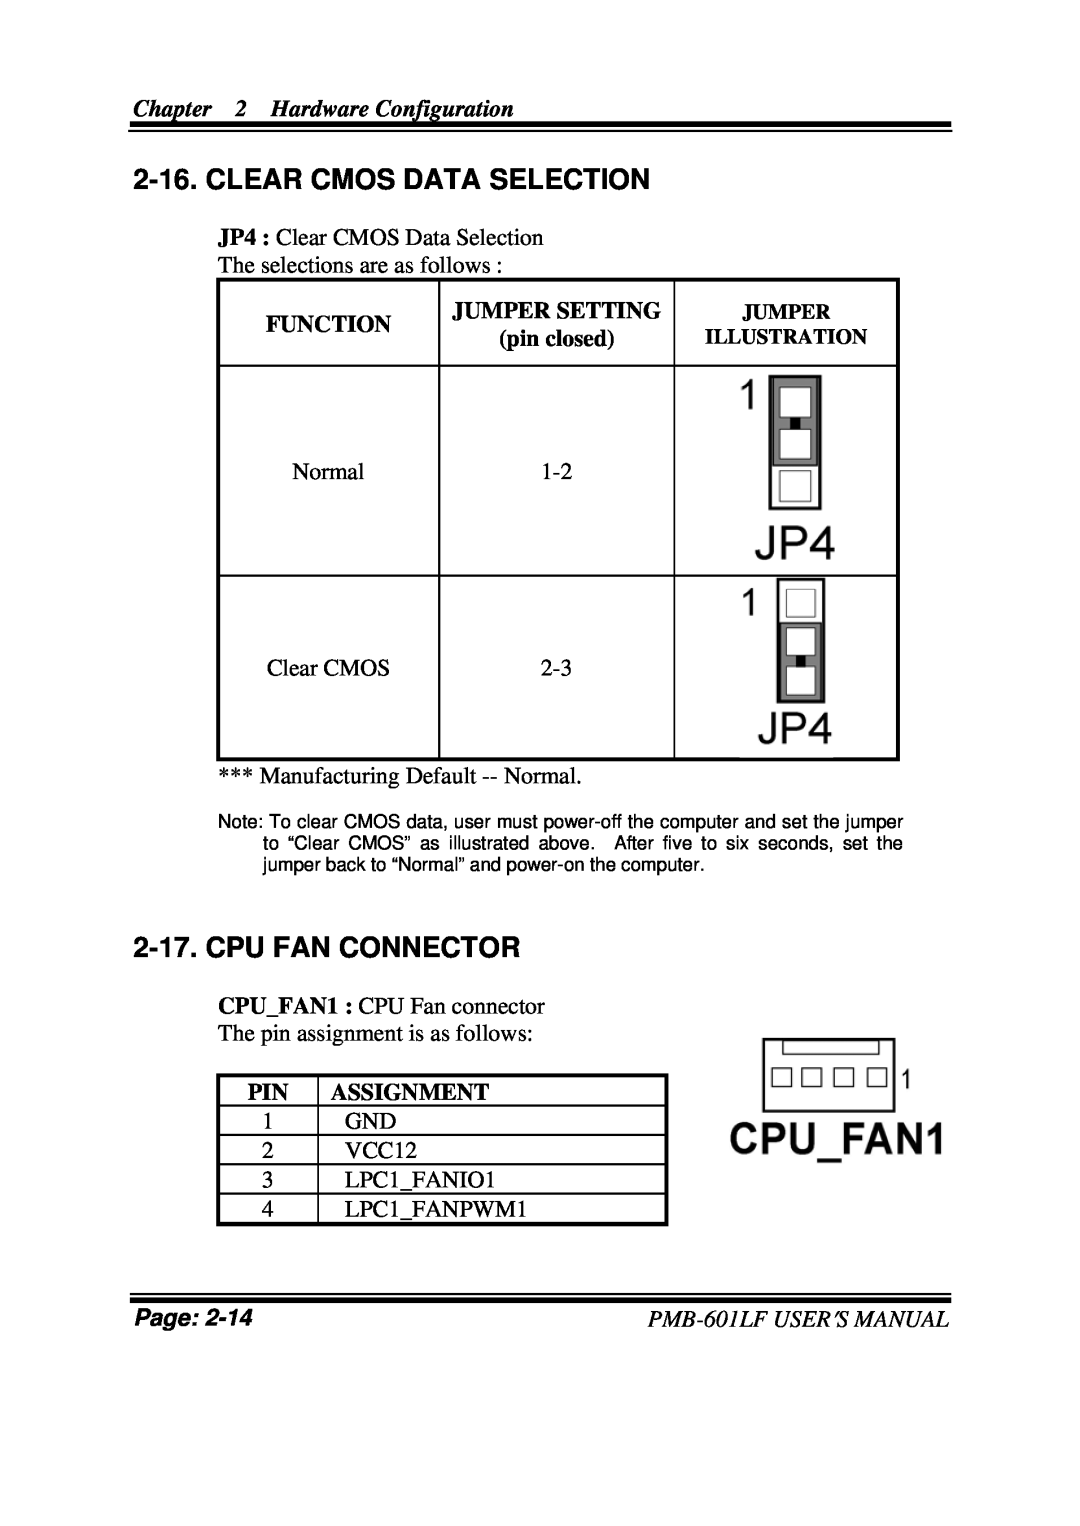 Intel PMB-601LF Clear Cmos Data Selection, Cpu Fan Connector, Function, Jumper Setting, Hardware Configuration, pin closed 